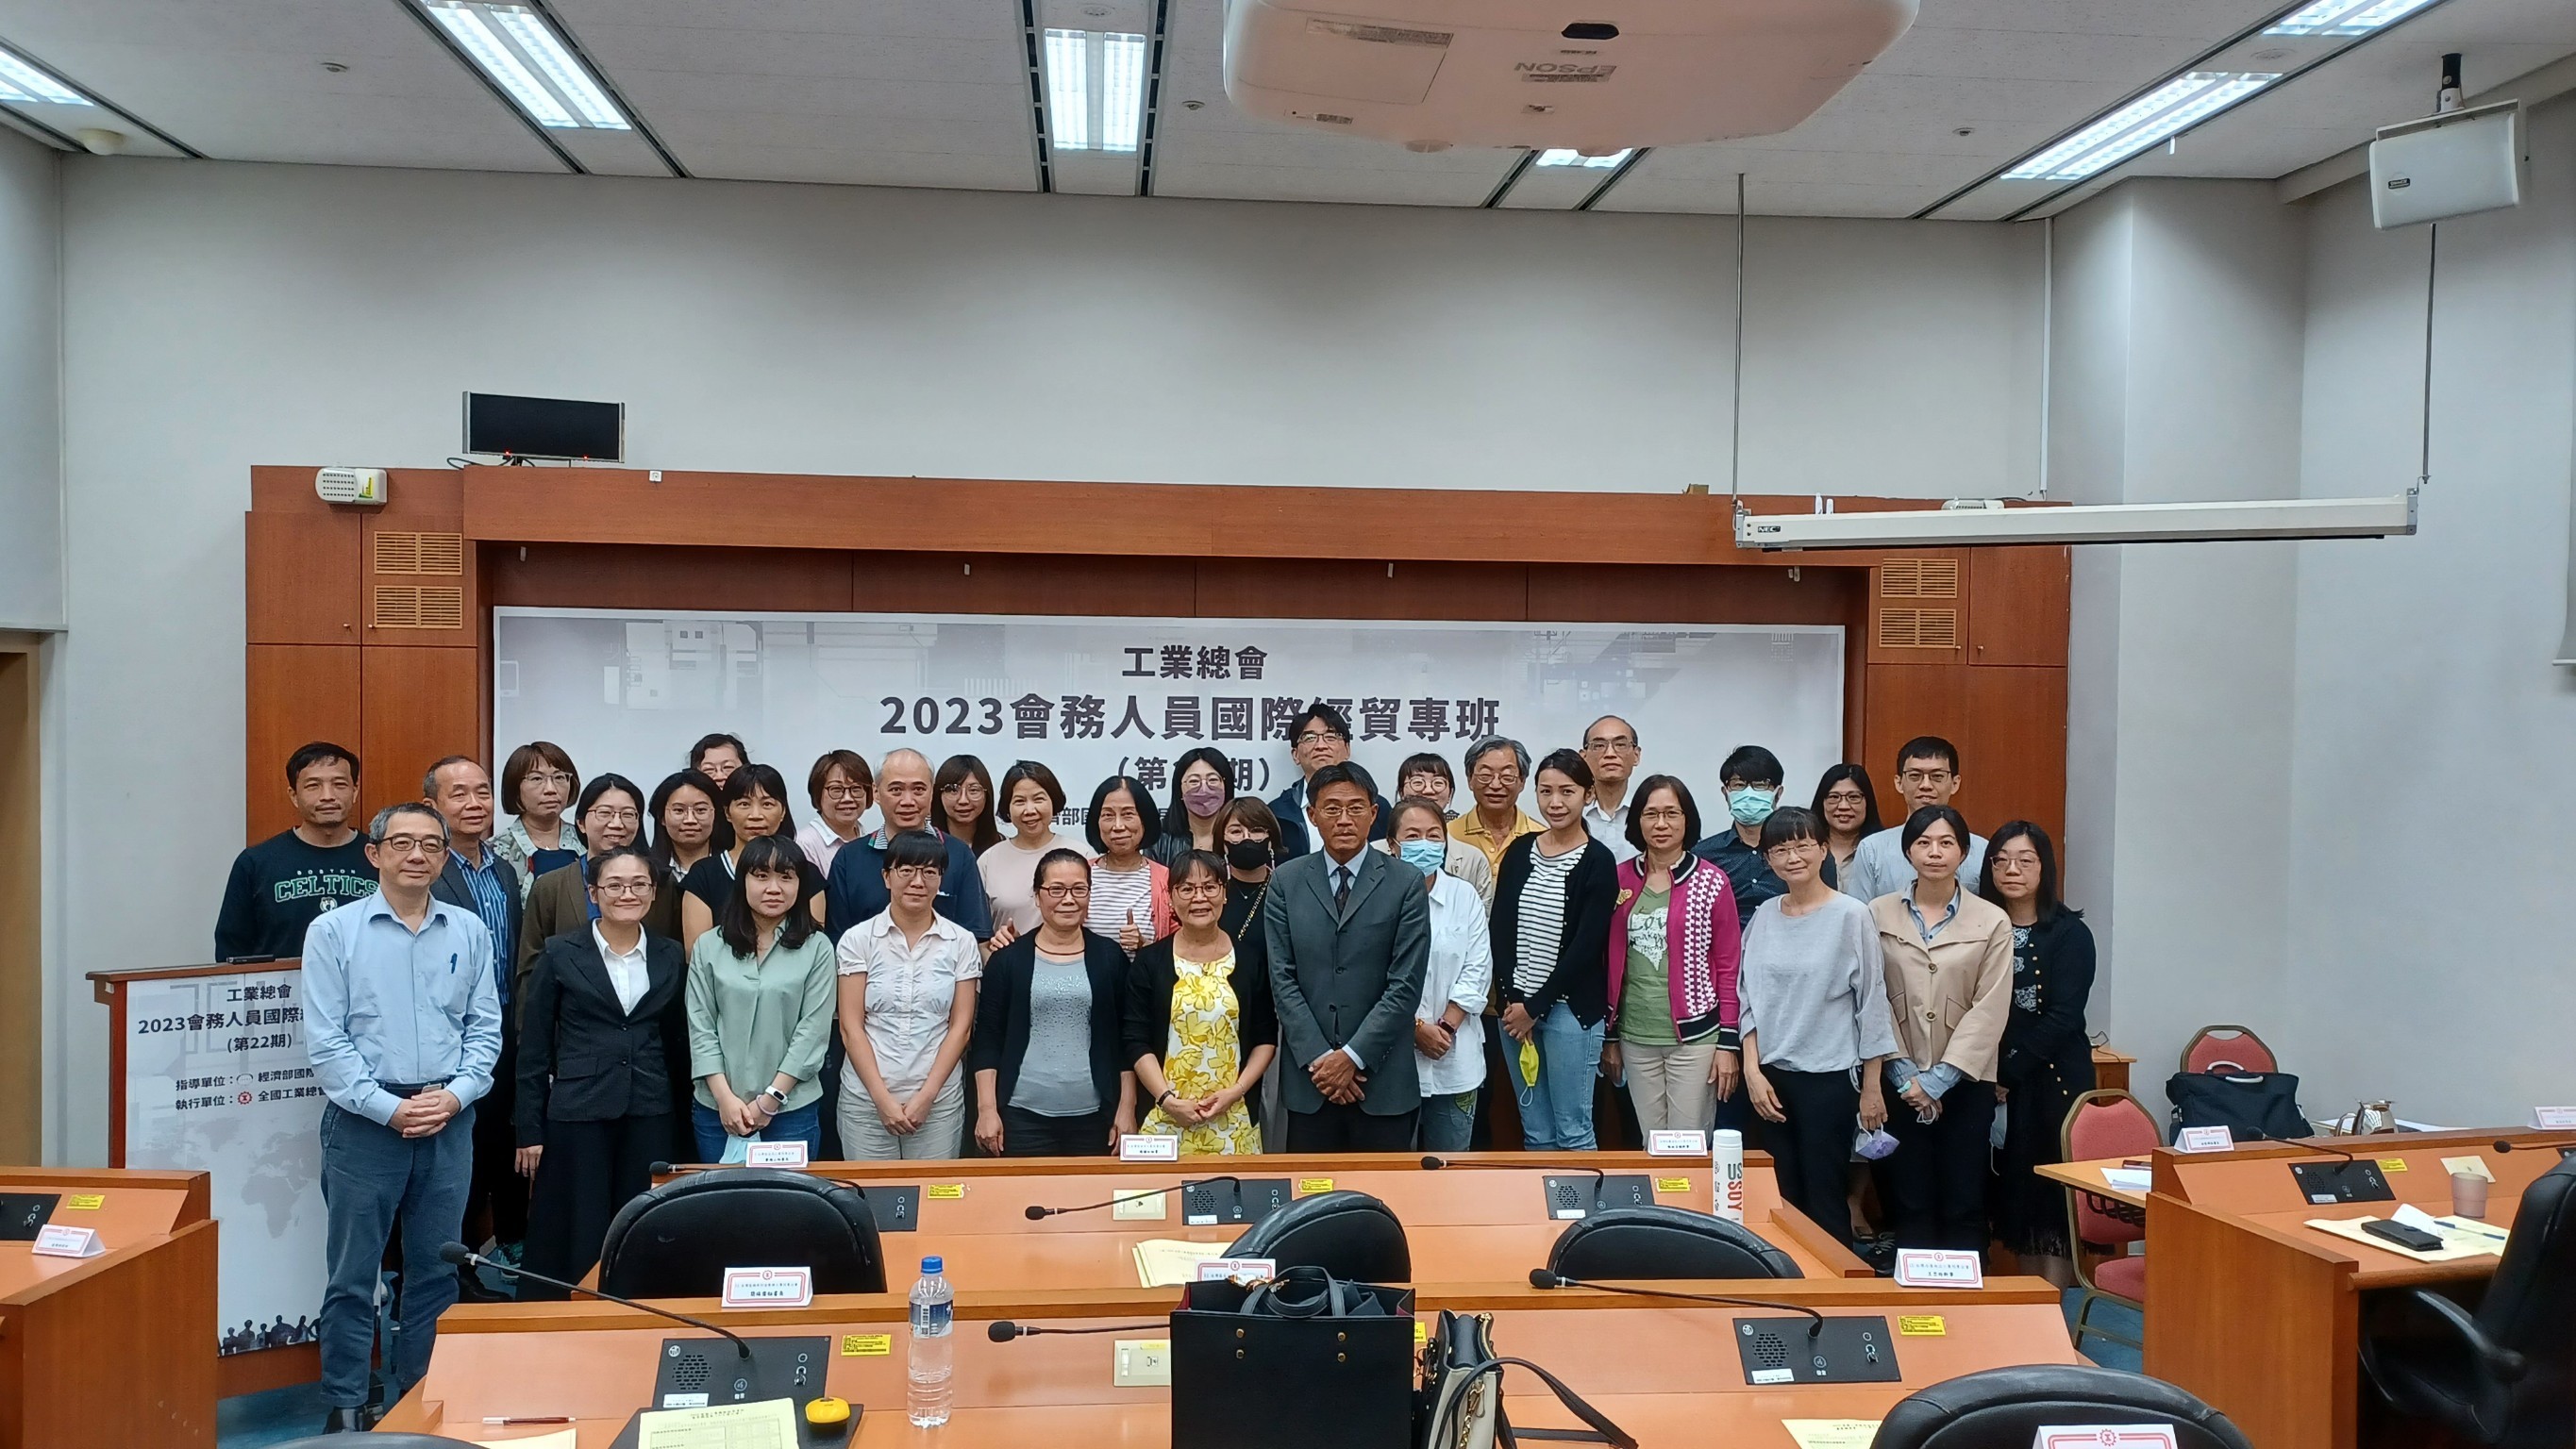 A group photo of Deputy Director General G. J. Lee (center) and participants of the program.